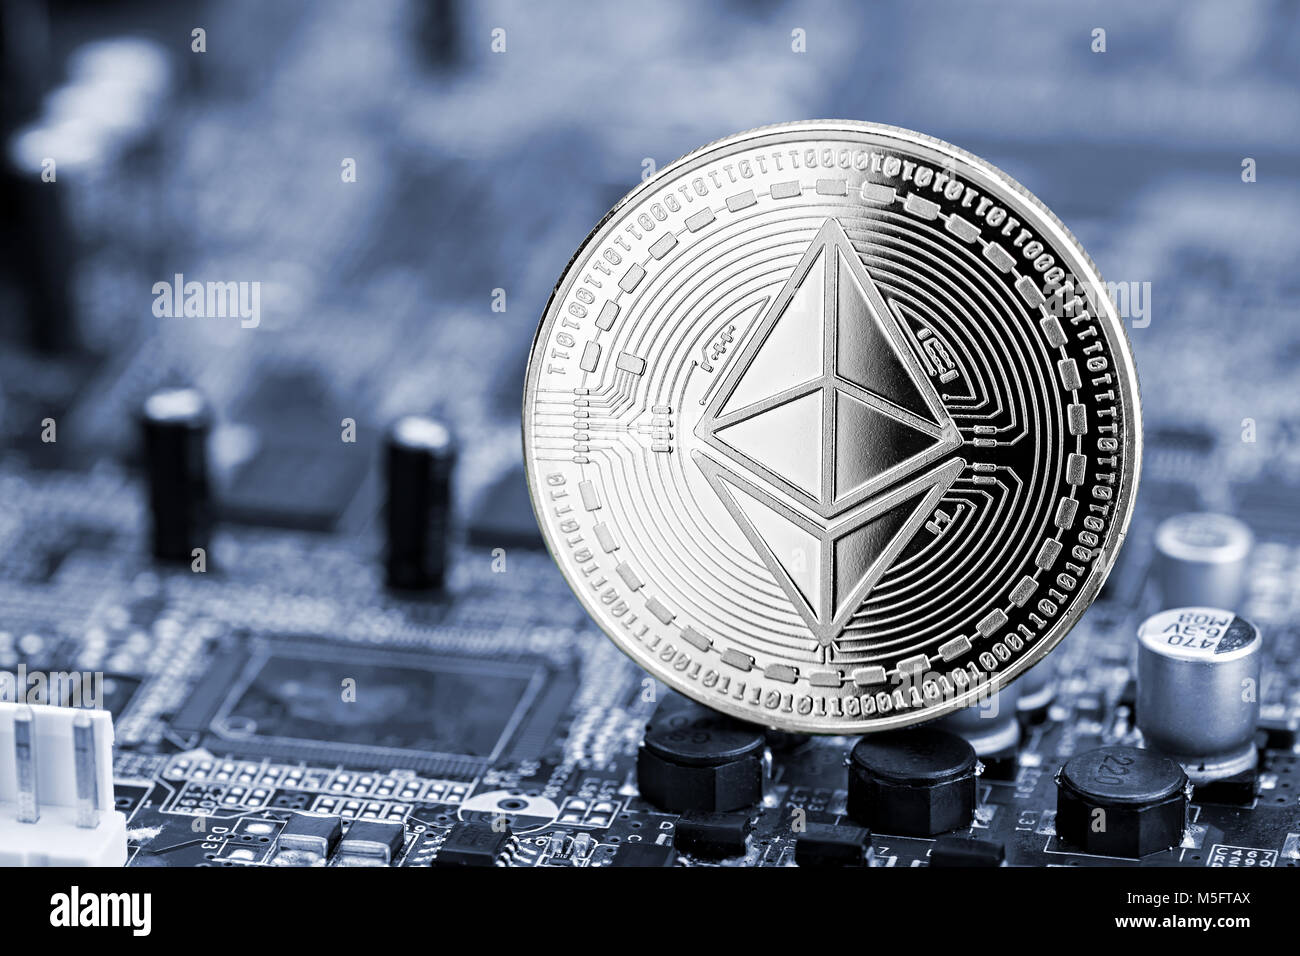 ethereum silver coin on blue motherboard chip digital mining computer hardwarecrypto currency financial background concept Stock Photo